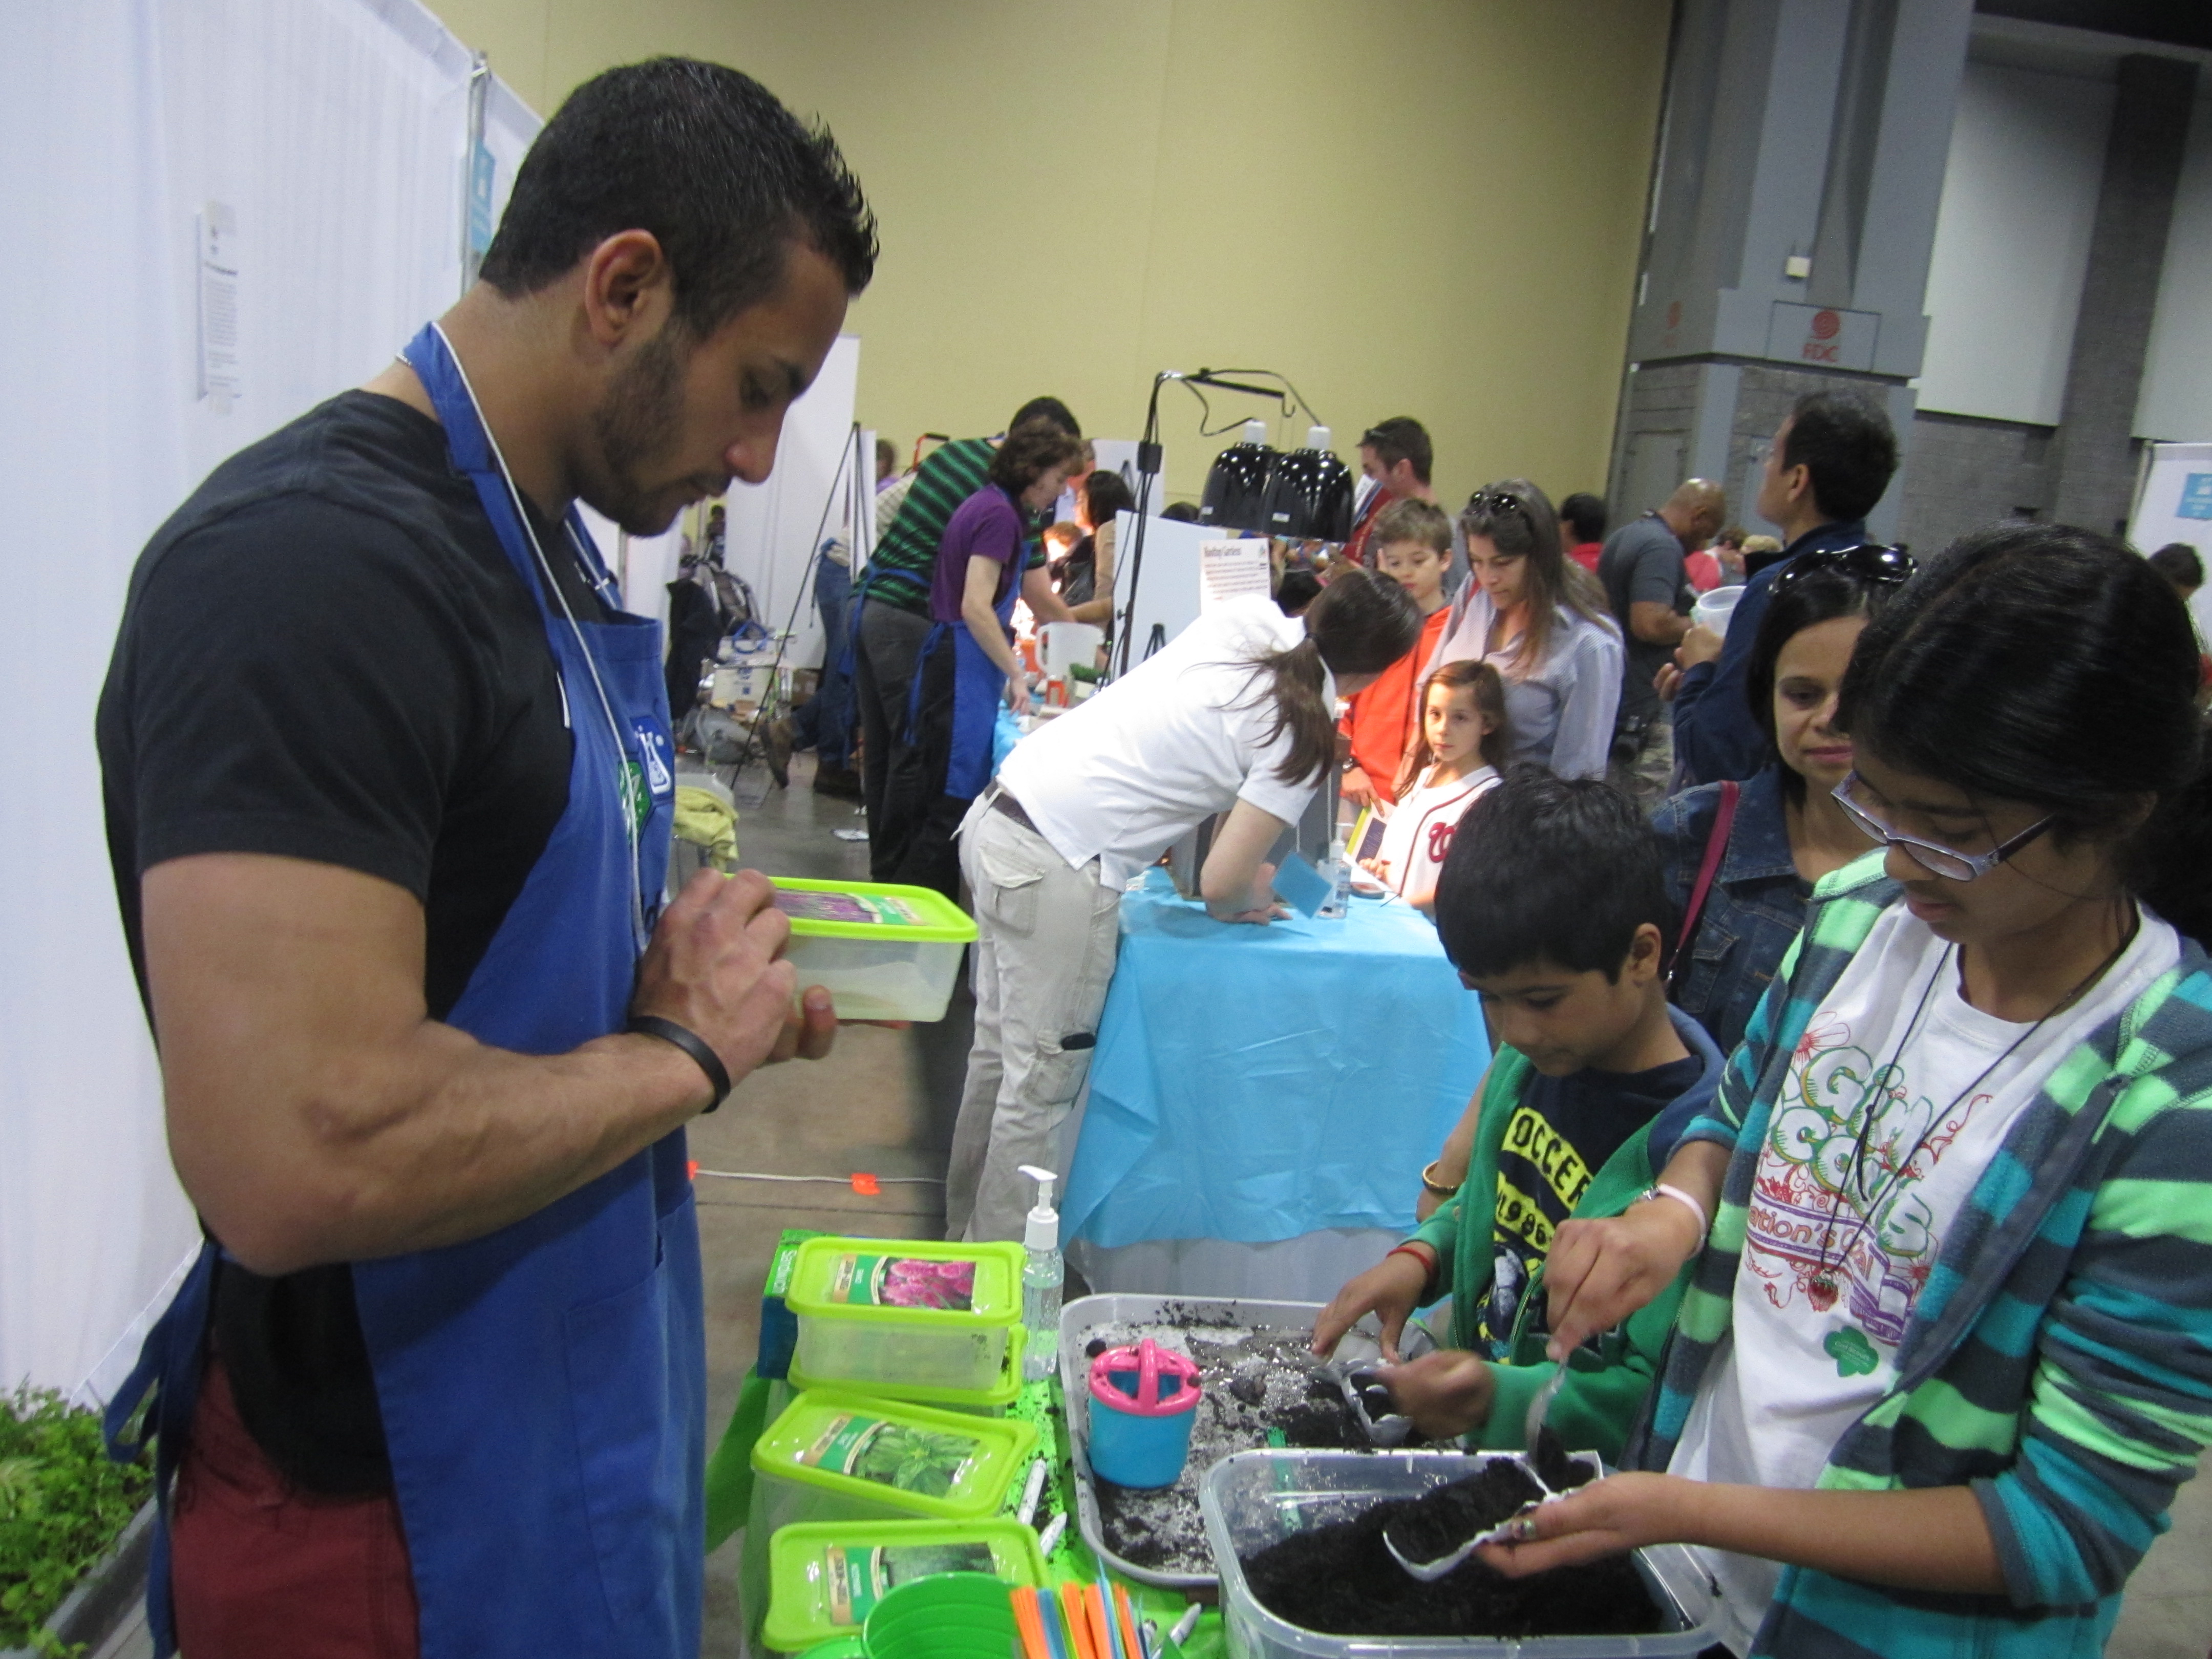 Volunteers plant herb seeds with children at the USA Festival of Science & Engineering